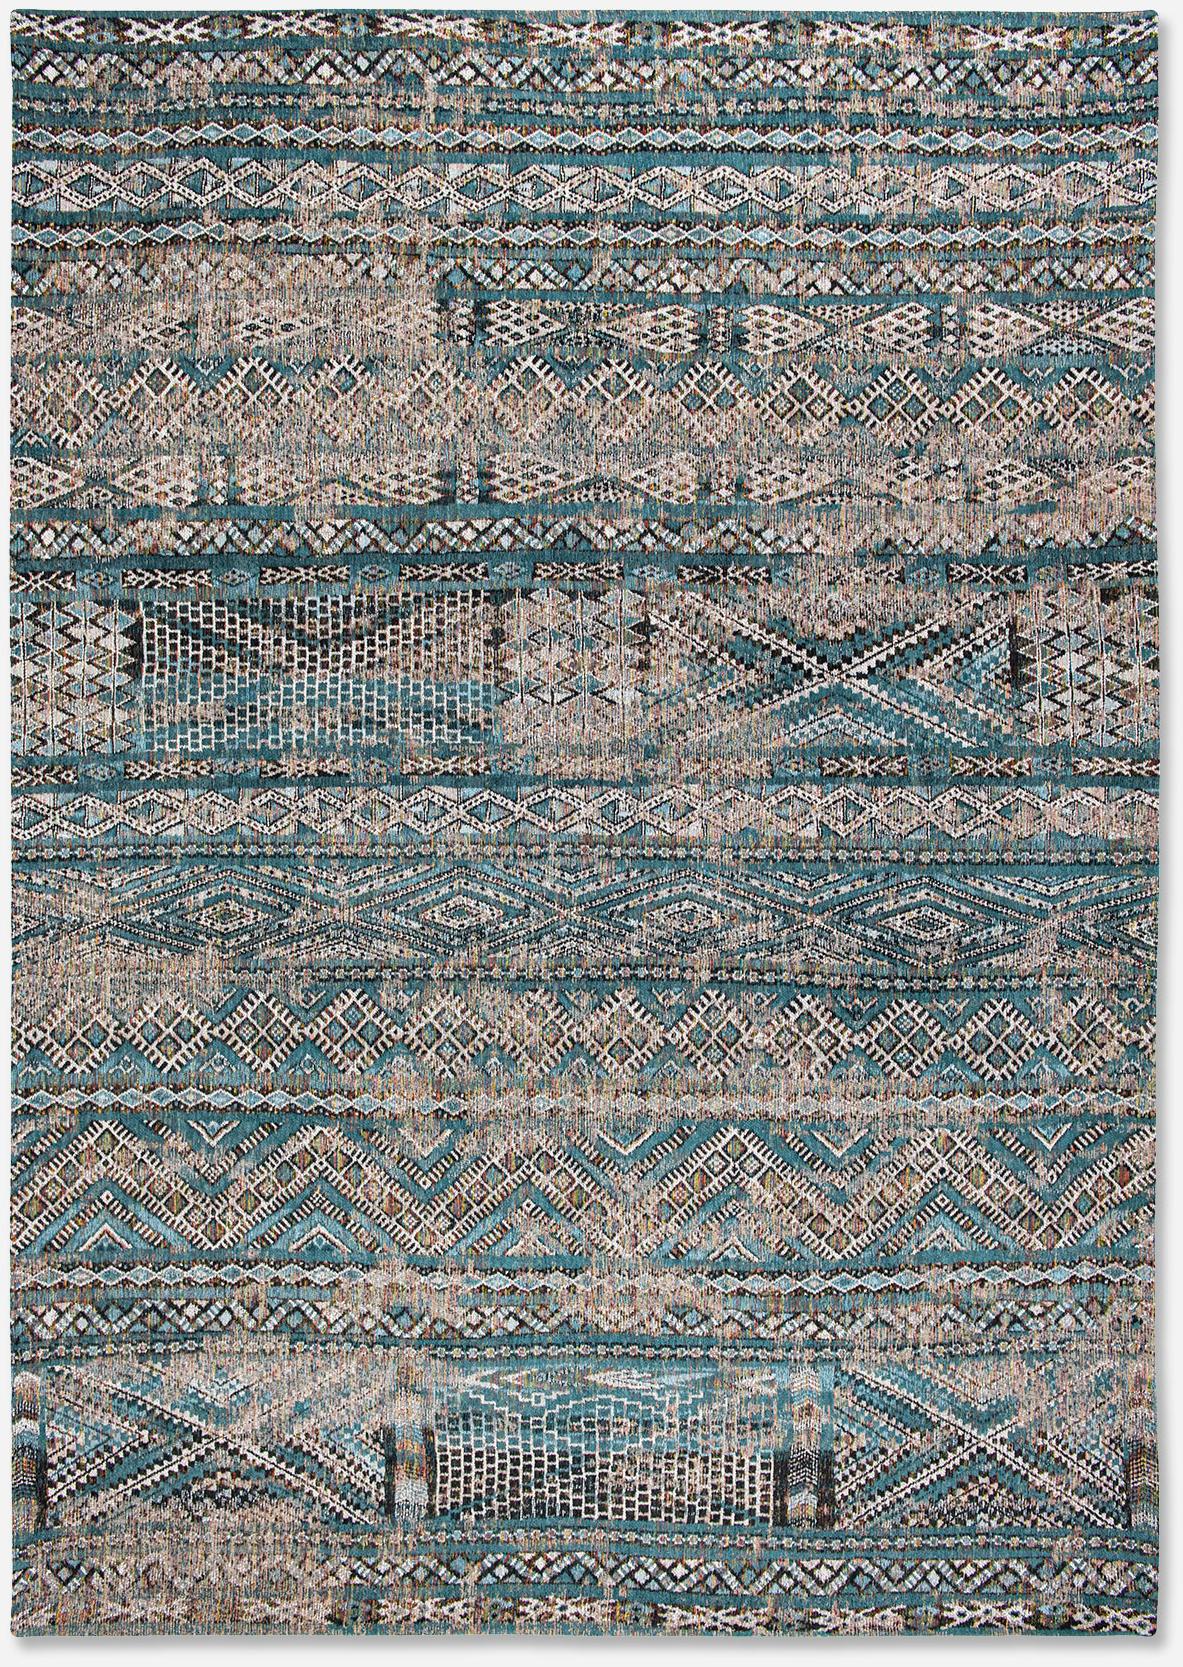 Antiquarian Flatwoven Rug ☞ Size: 9' 2" x 13' (280 x 390 cm)